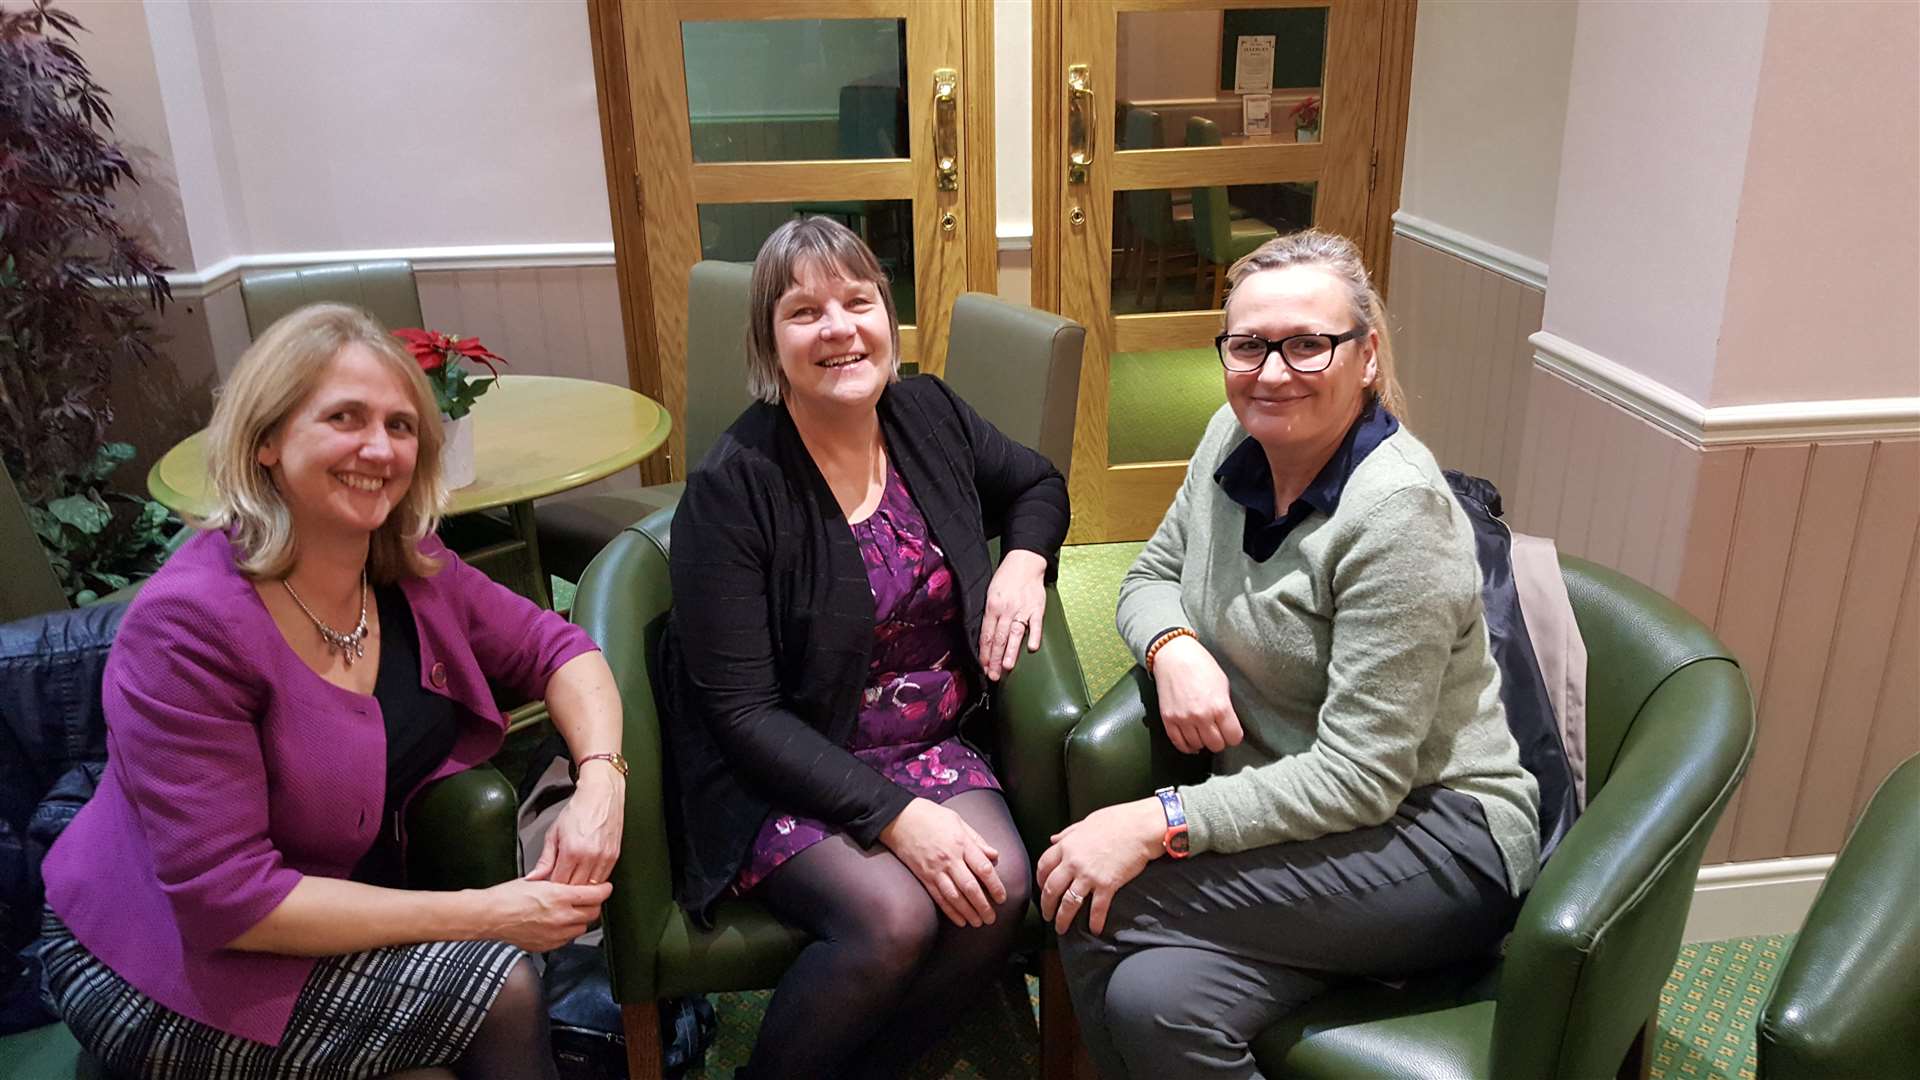 From left, Sara Williamson, head teacher of St Michael's Primary School; Sally Lees, chief executive of the Trust and Homewood principal and Sam Crinnion, executive head teacher of Tenterden Primary Federation